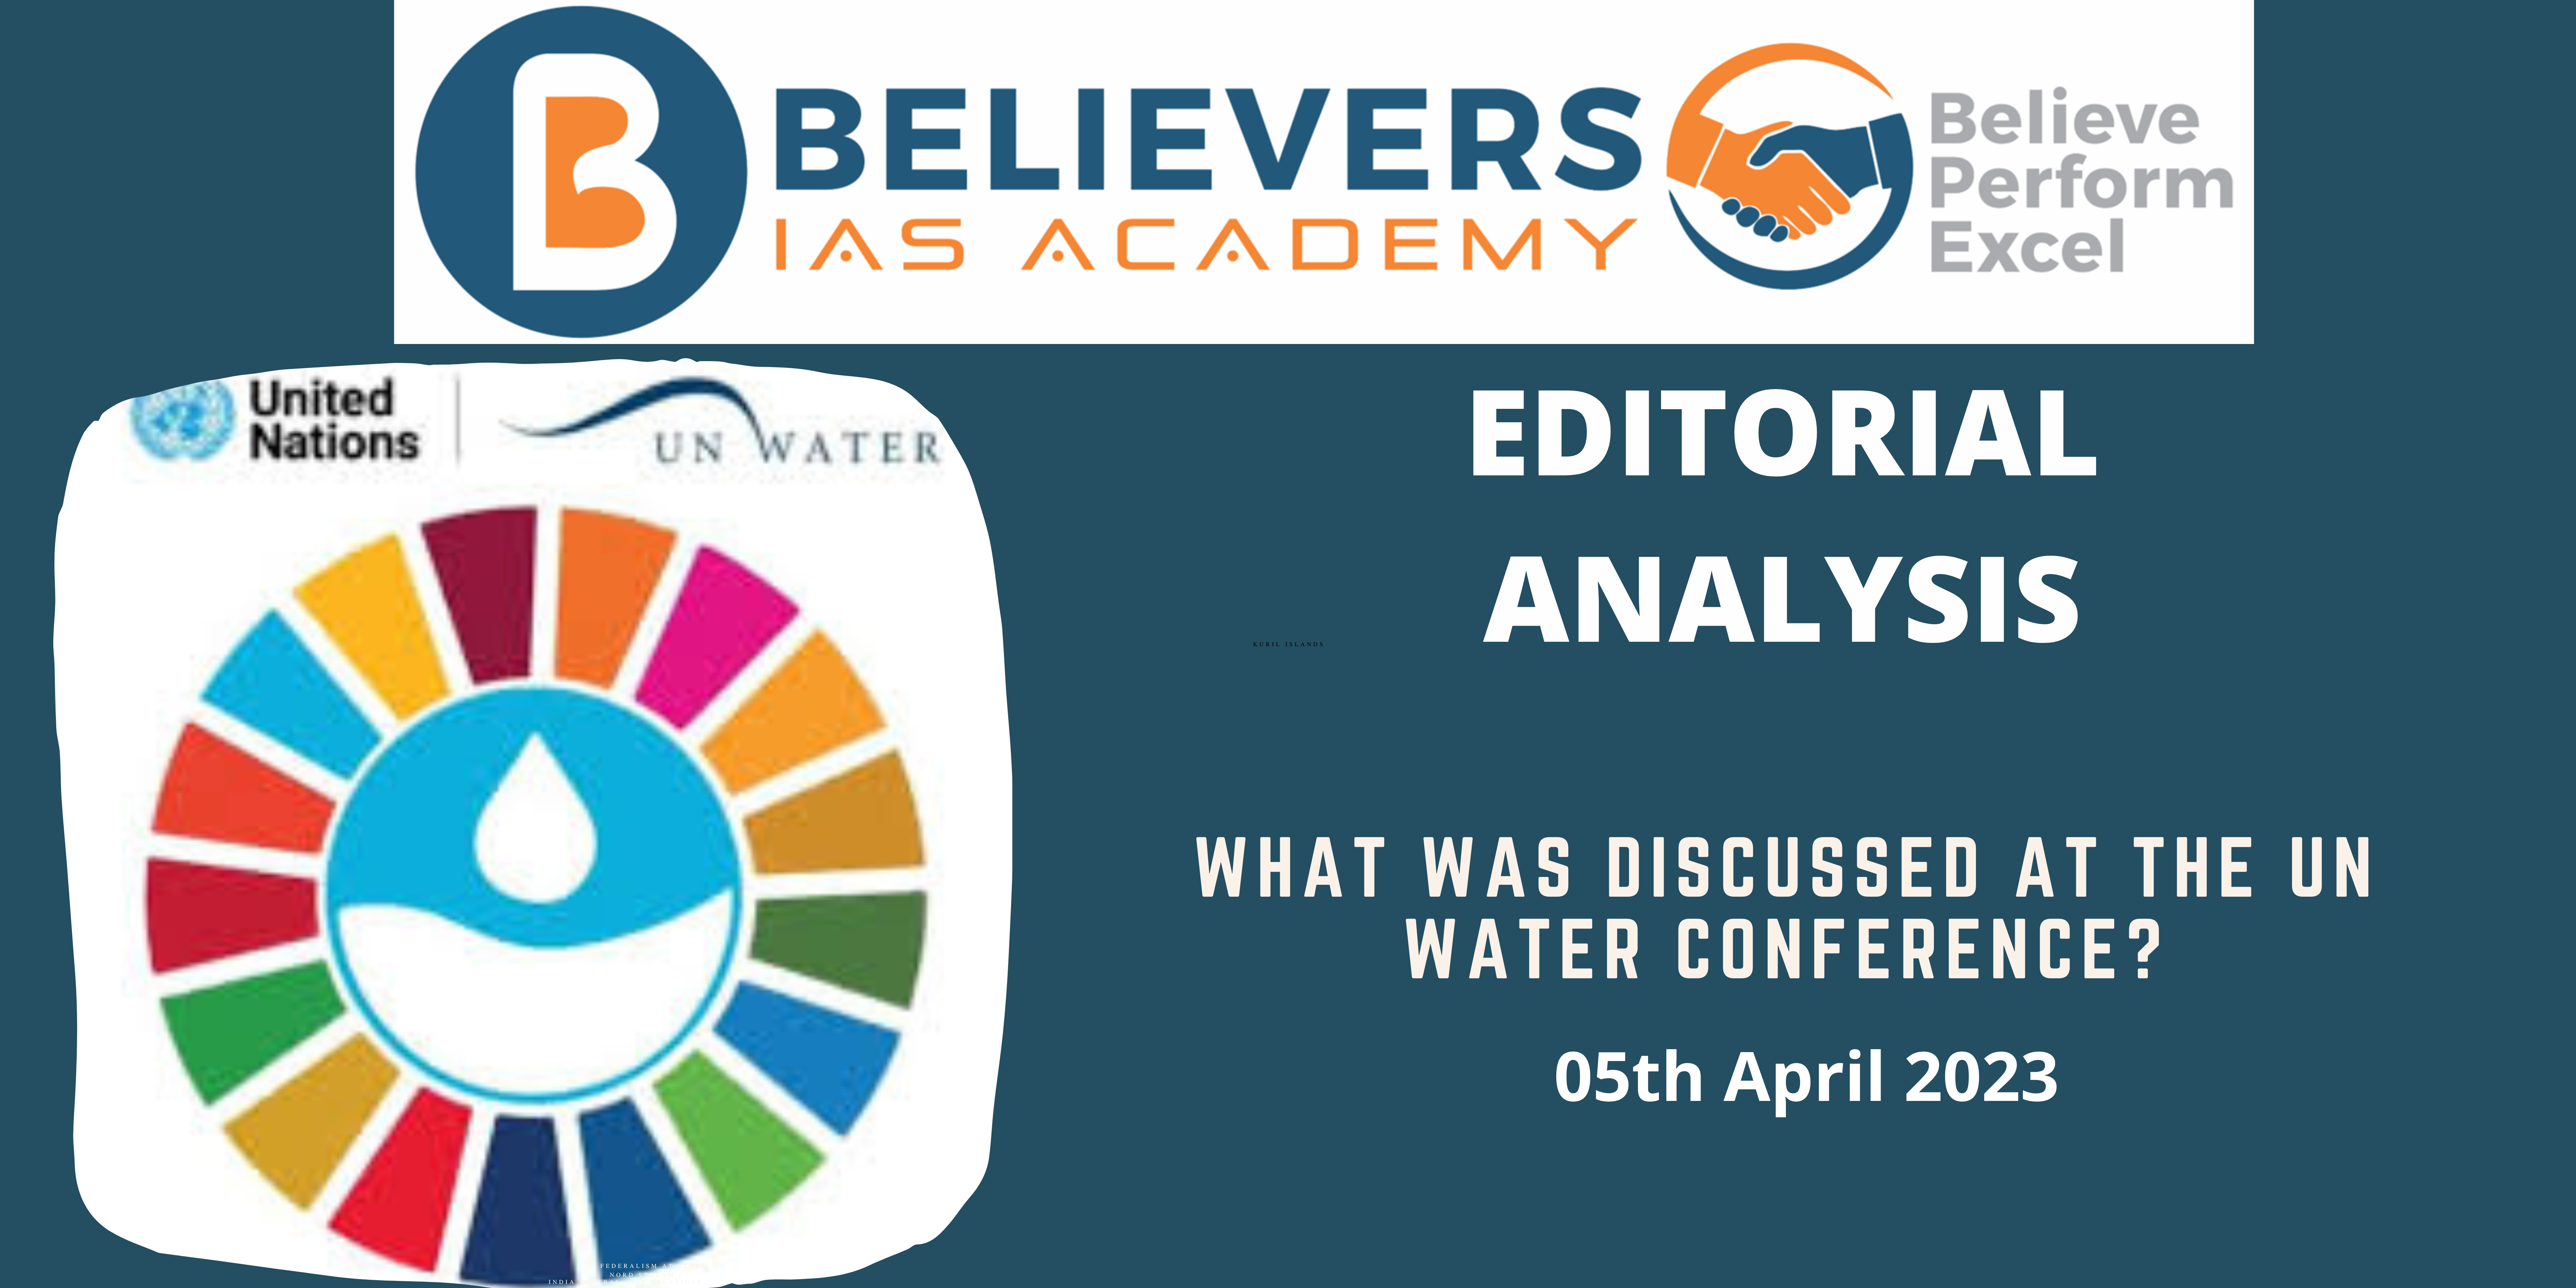 What was discussed at the UN water conference?